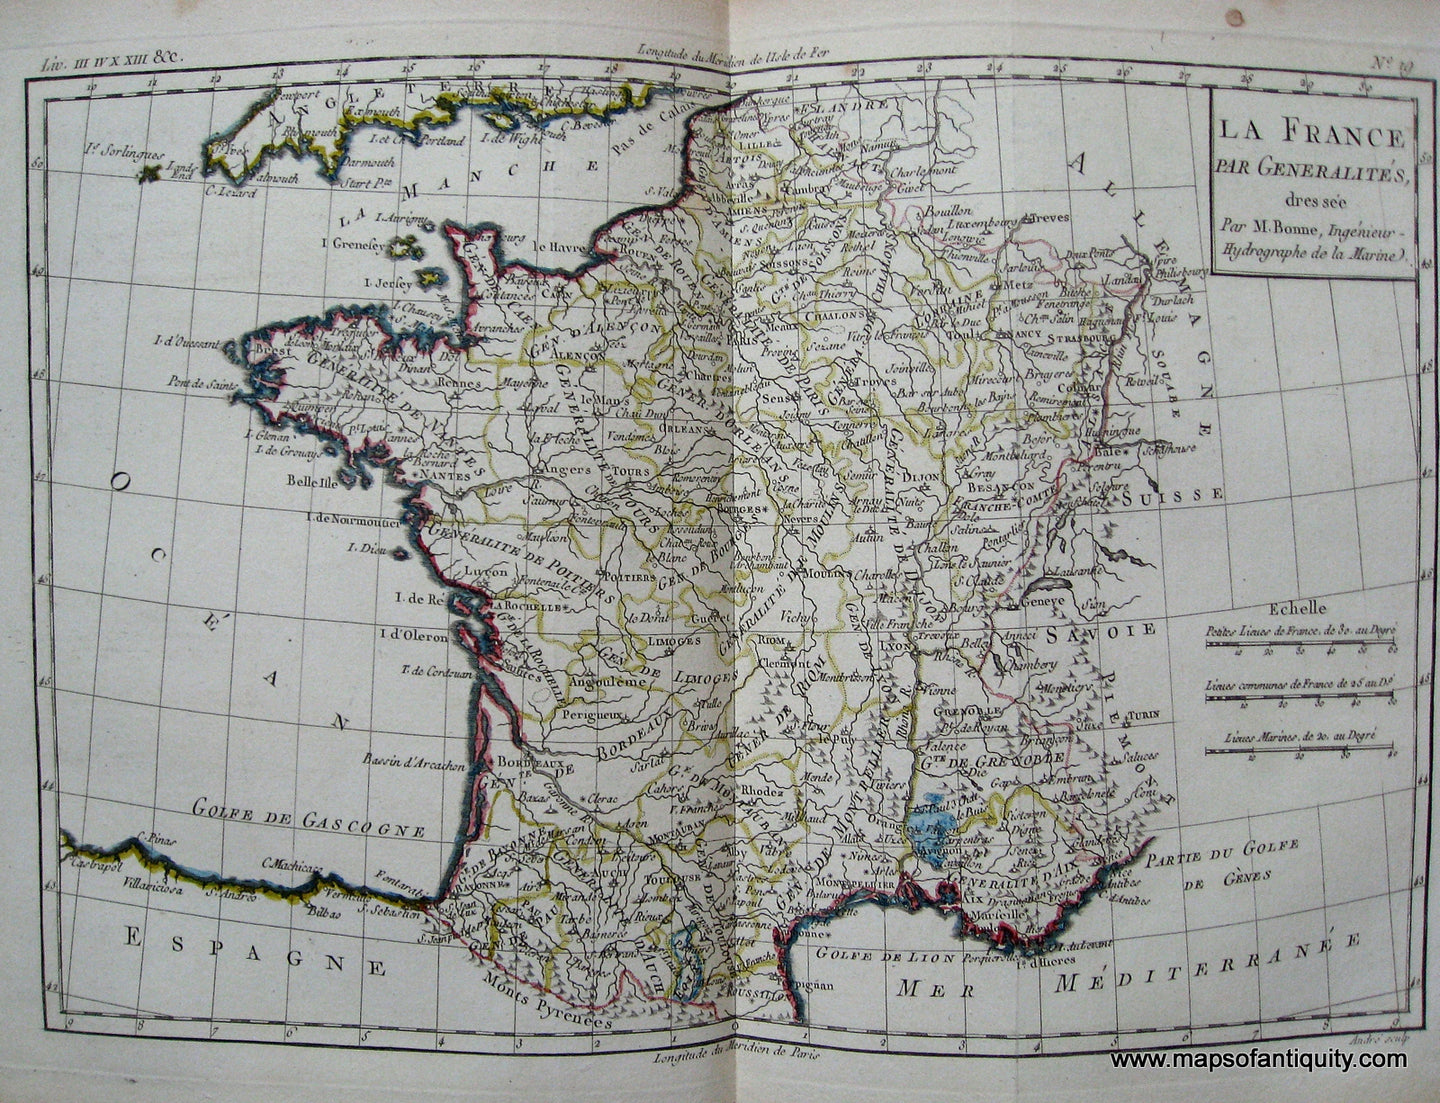 Antique-Hand-Colored-Map-La-France.-Europe-France-1780-Raynal-and-Bonne-Maps-Of-Antiquity